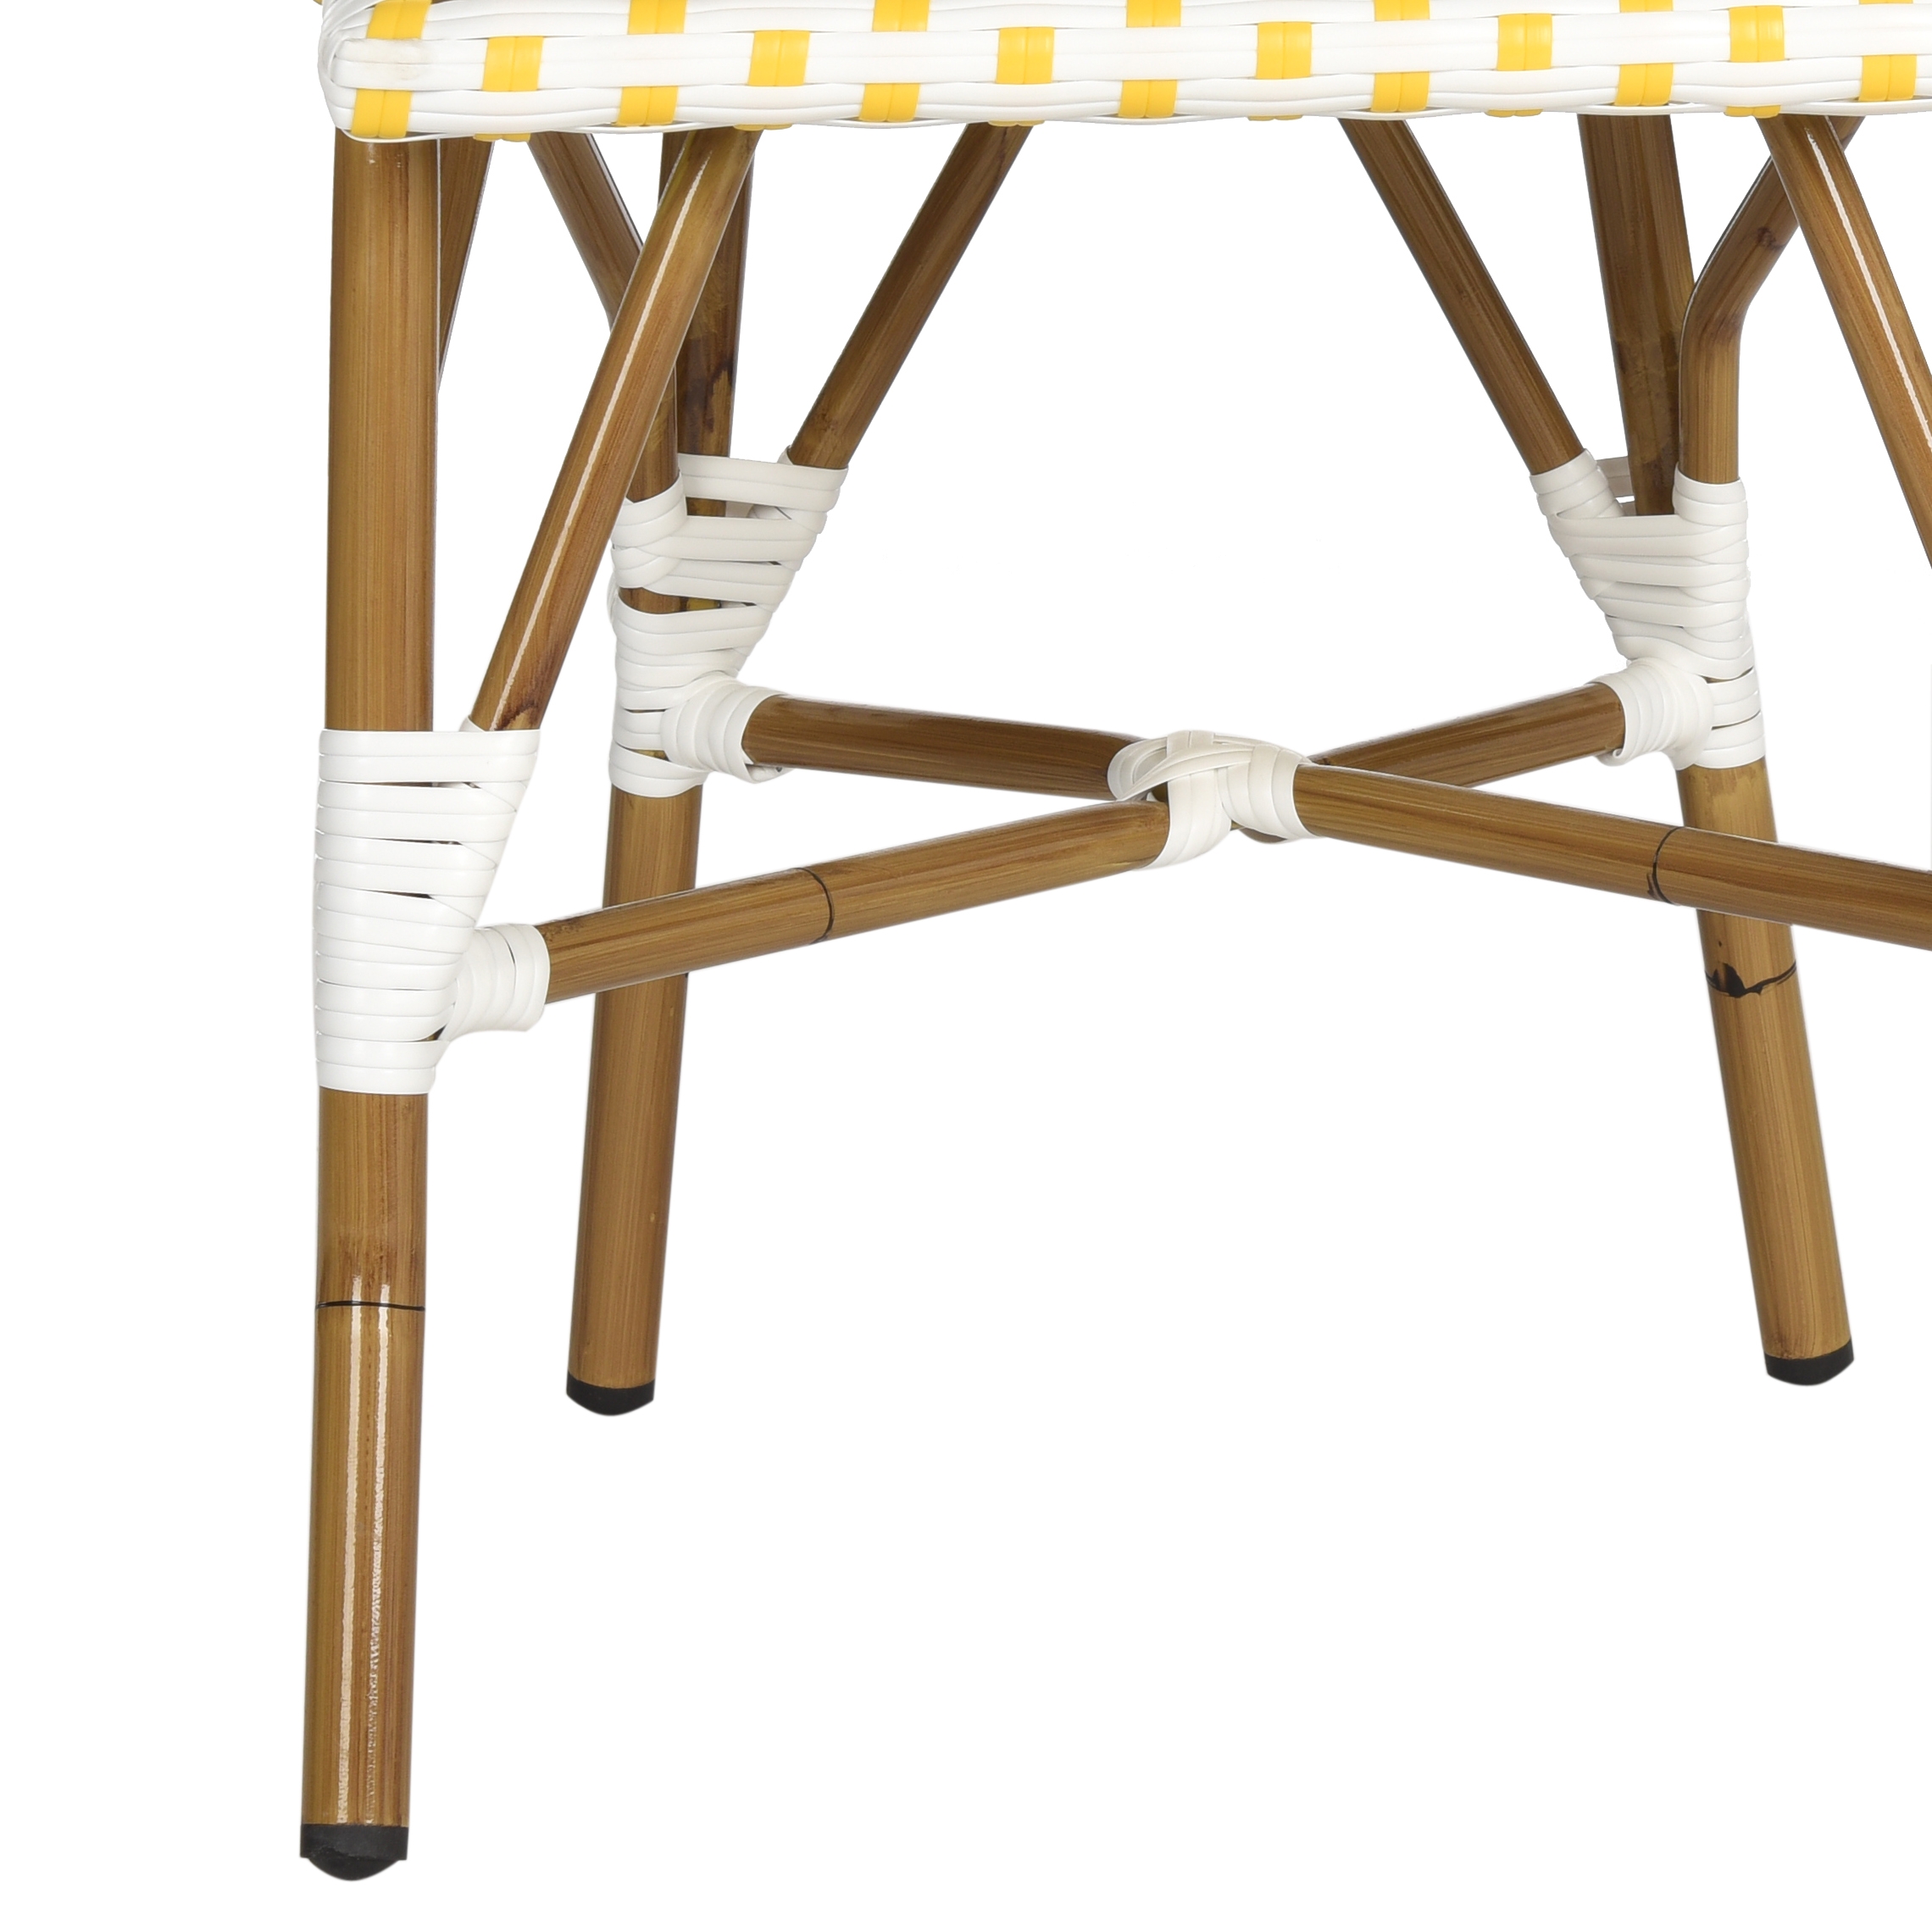 Salcha Indoor-Outdoor French Bistro Stacking Side Chair - Yellow/White/Light Brown - Arlo Home - Image 4